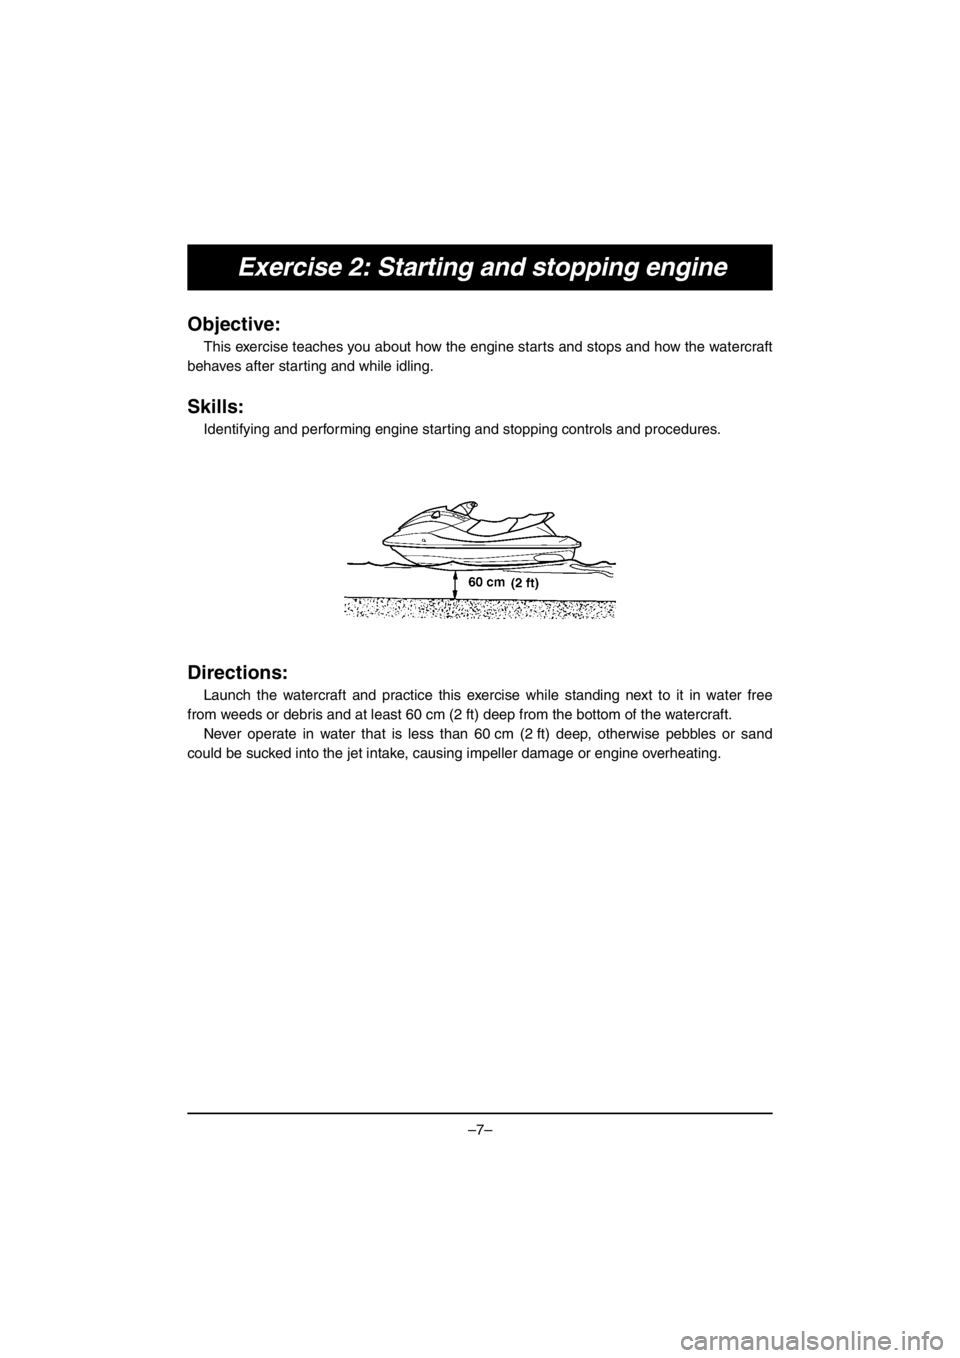 YAMAHA EX 2017  Manual de utilização (in Portuguese) –7–
Exercise 2: Starting and stopping engine
Objective:
This exercise teaches you about how the engine starts and stops and how the watercraft
behaves after starting and while idling.
Skills:
Iden